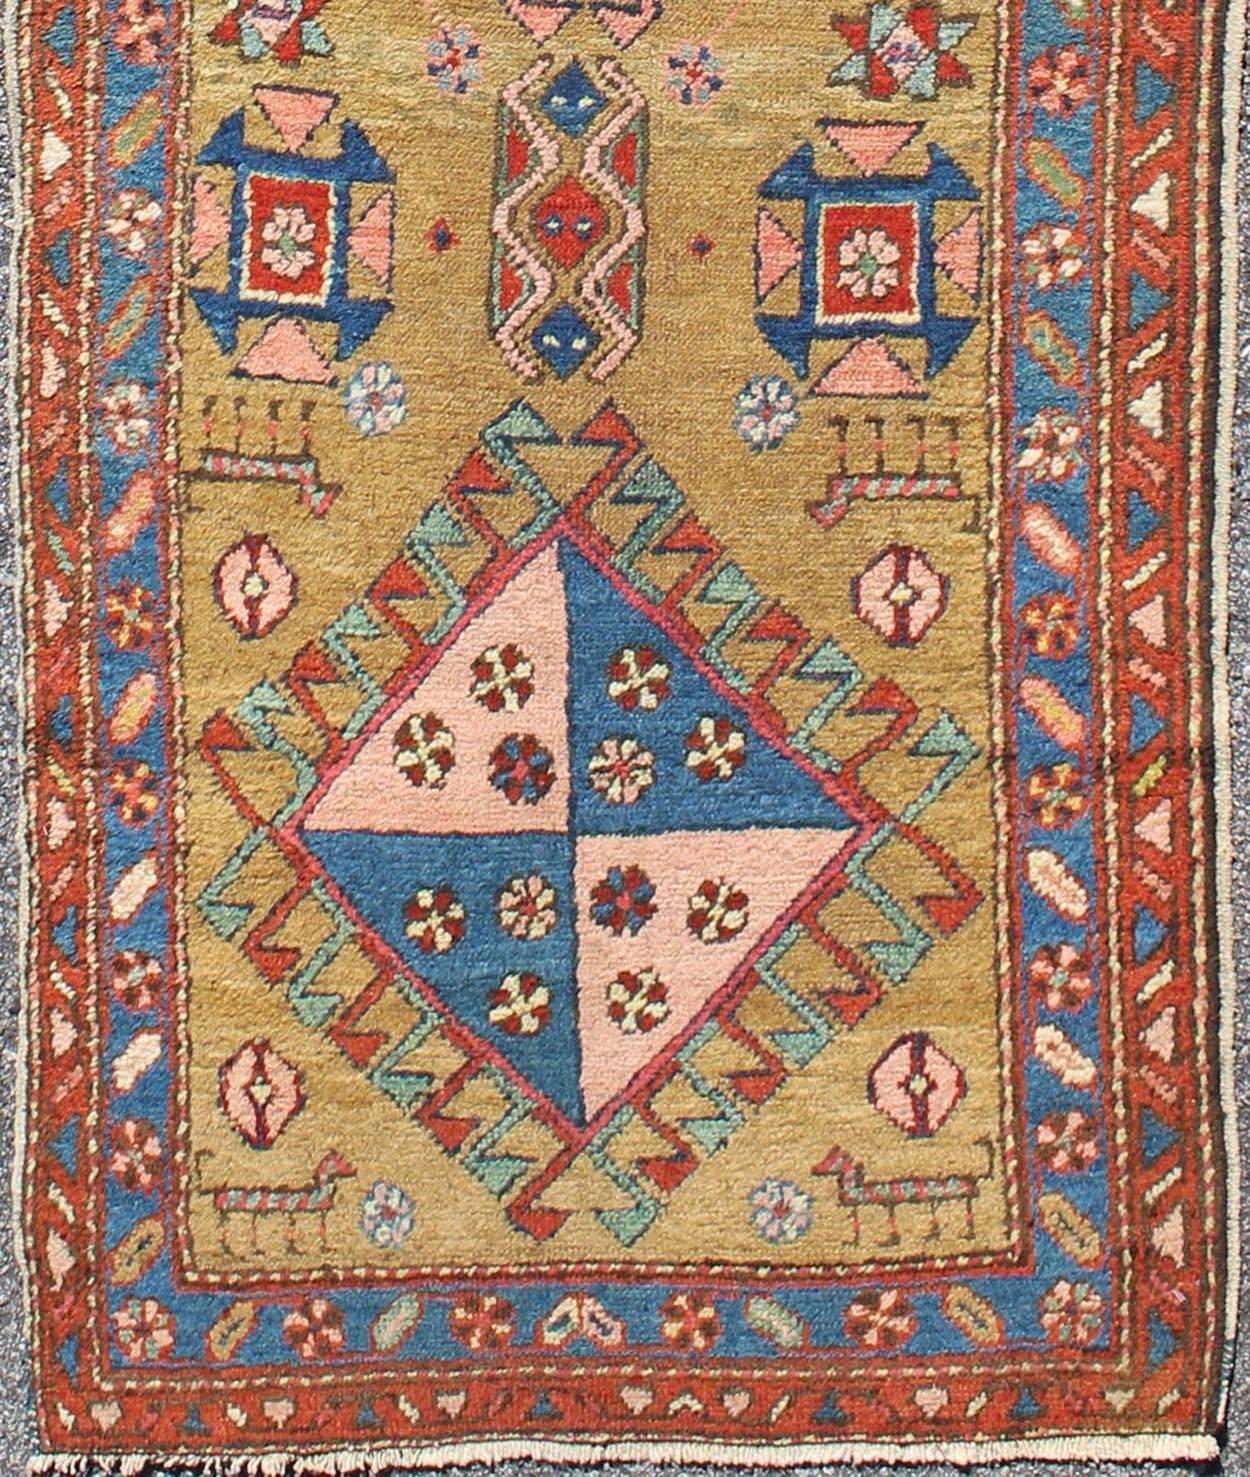 Antique Persian Serapi Short Runner in Gold & Yellow Background.
This antique Serapi-Heriz displays a charming and rich combination of various jewel colors. The geometric diamond shapes are repeated in different forms and colors throughout the